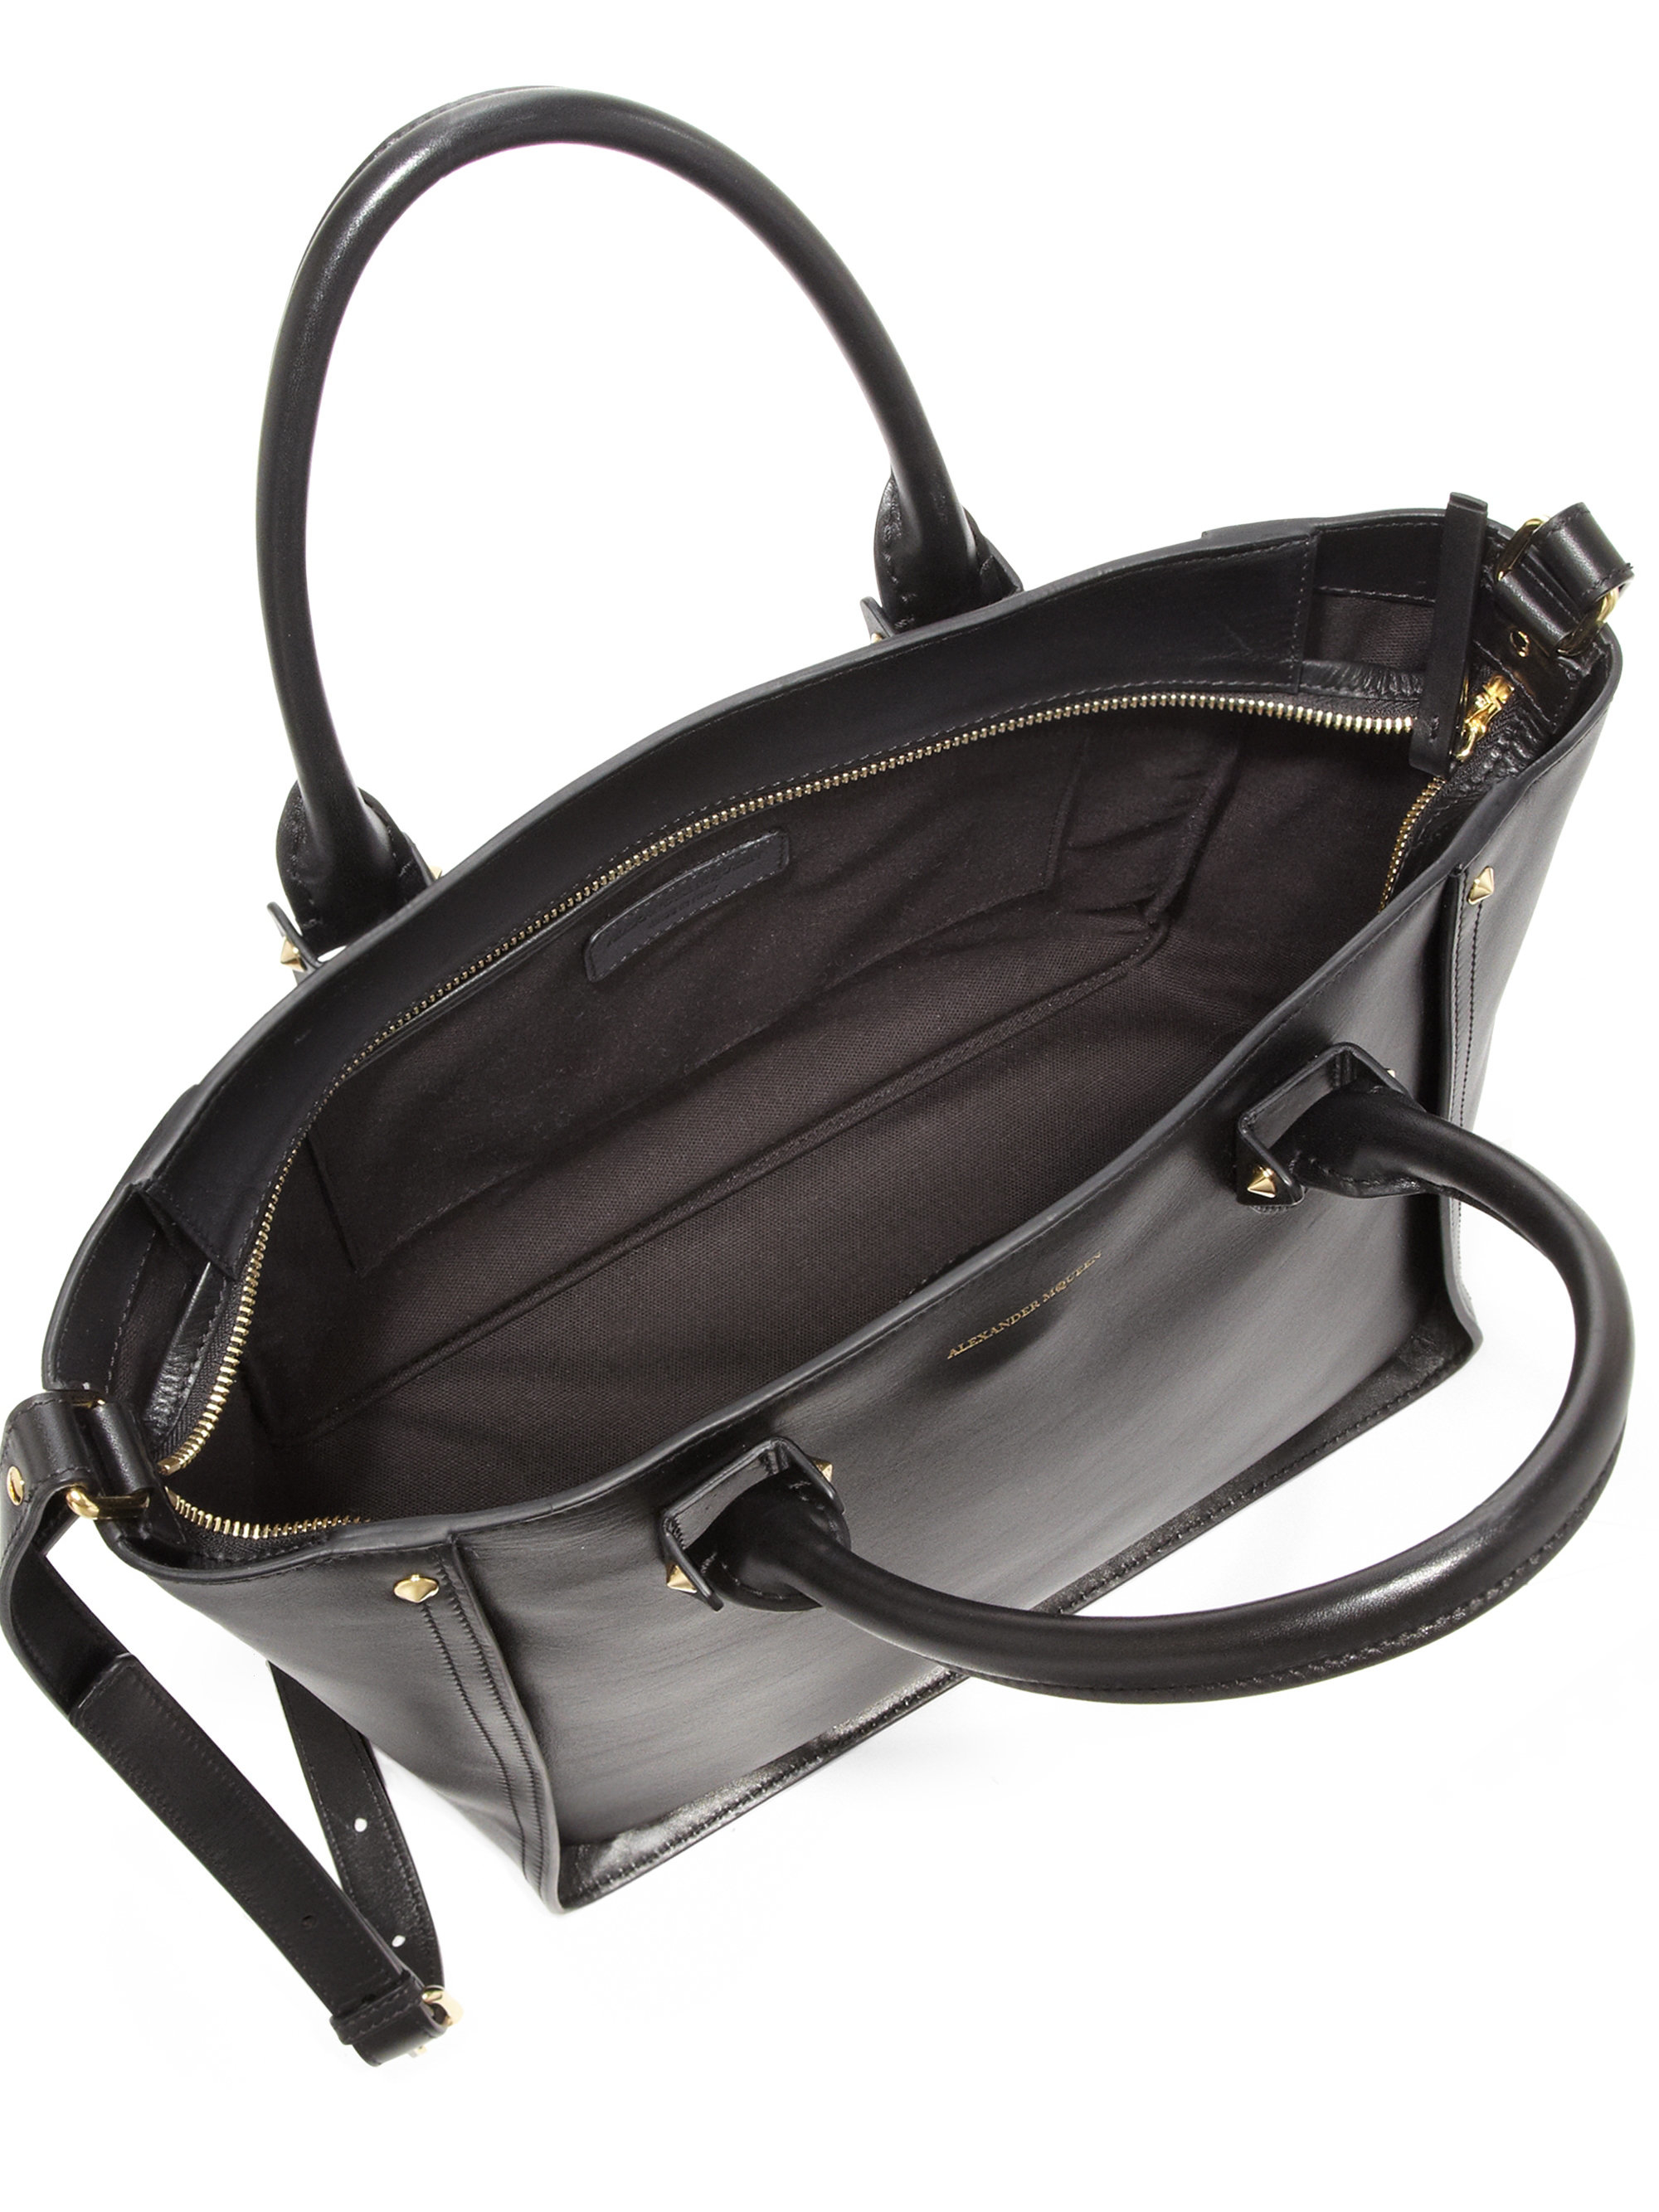 Alexander McQueen Inside Out Leather Shopper Tote Bag in Black - Lyst